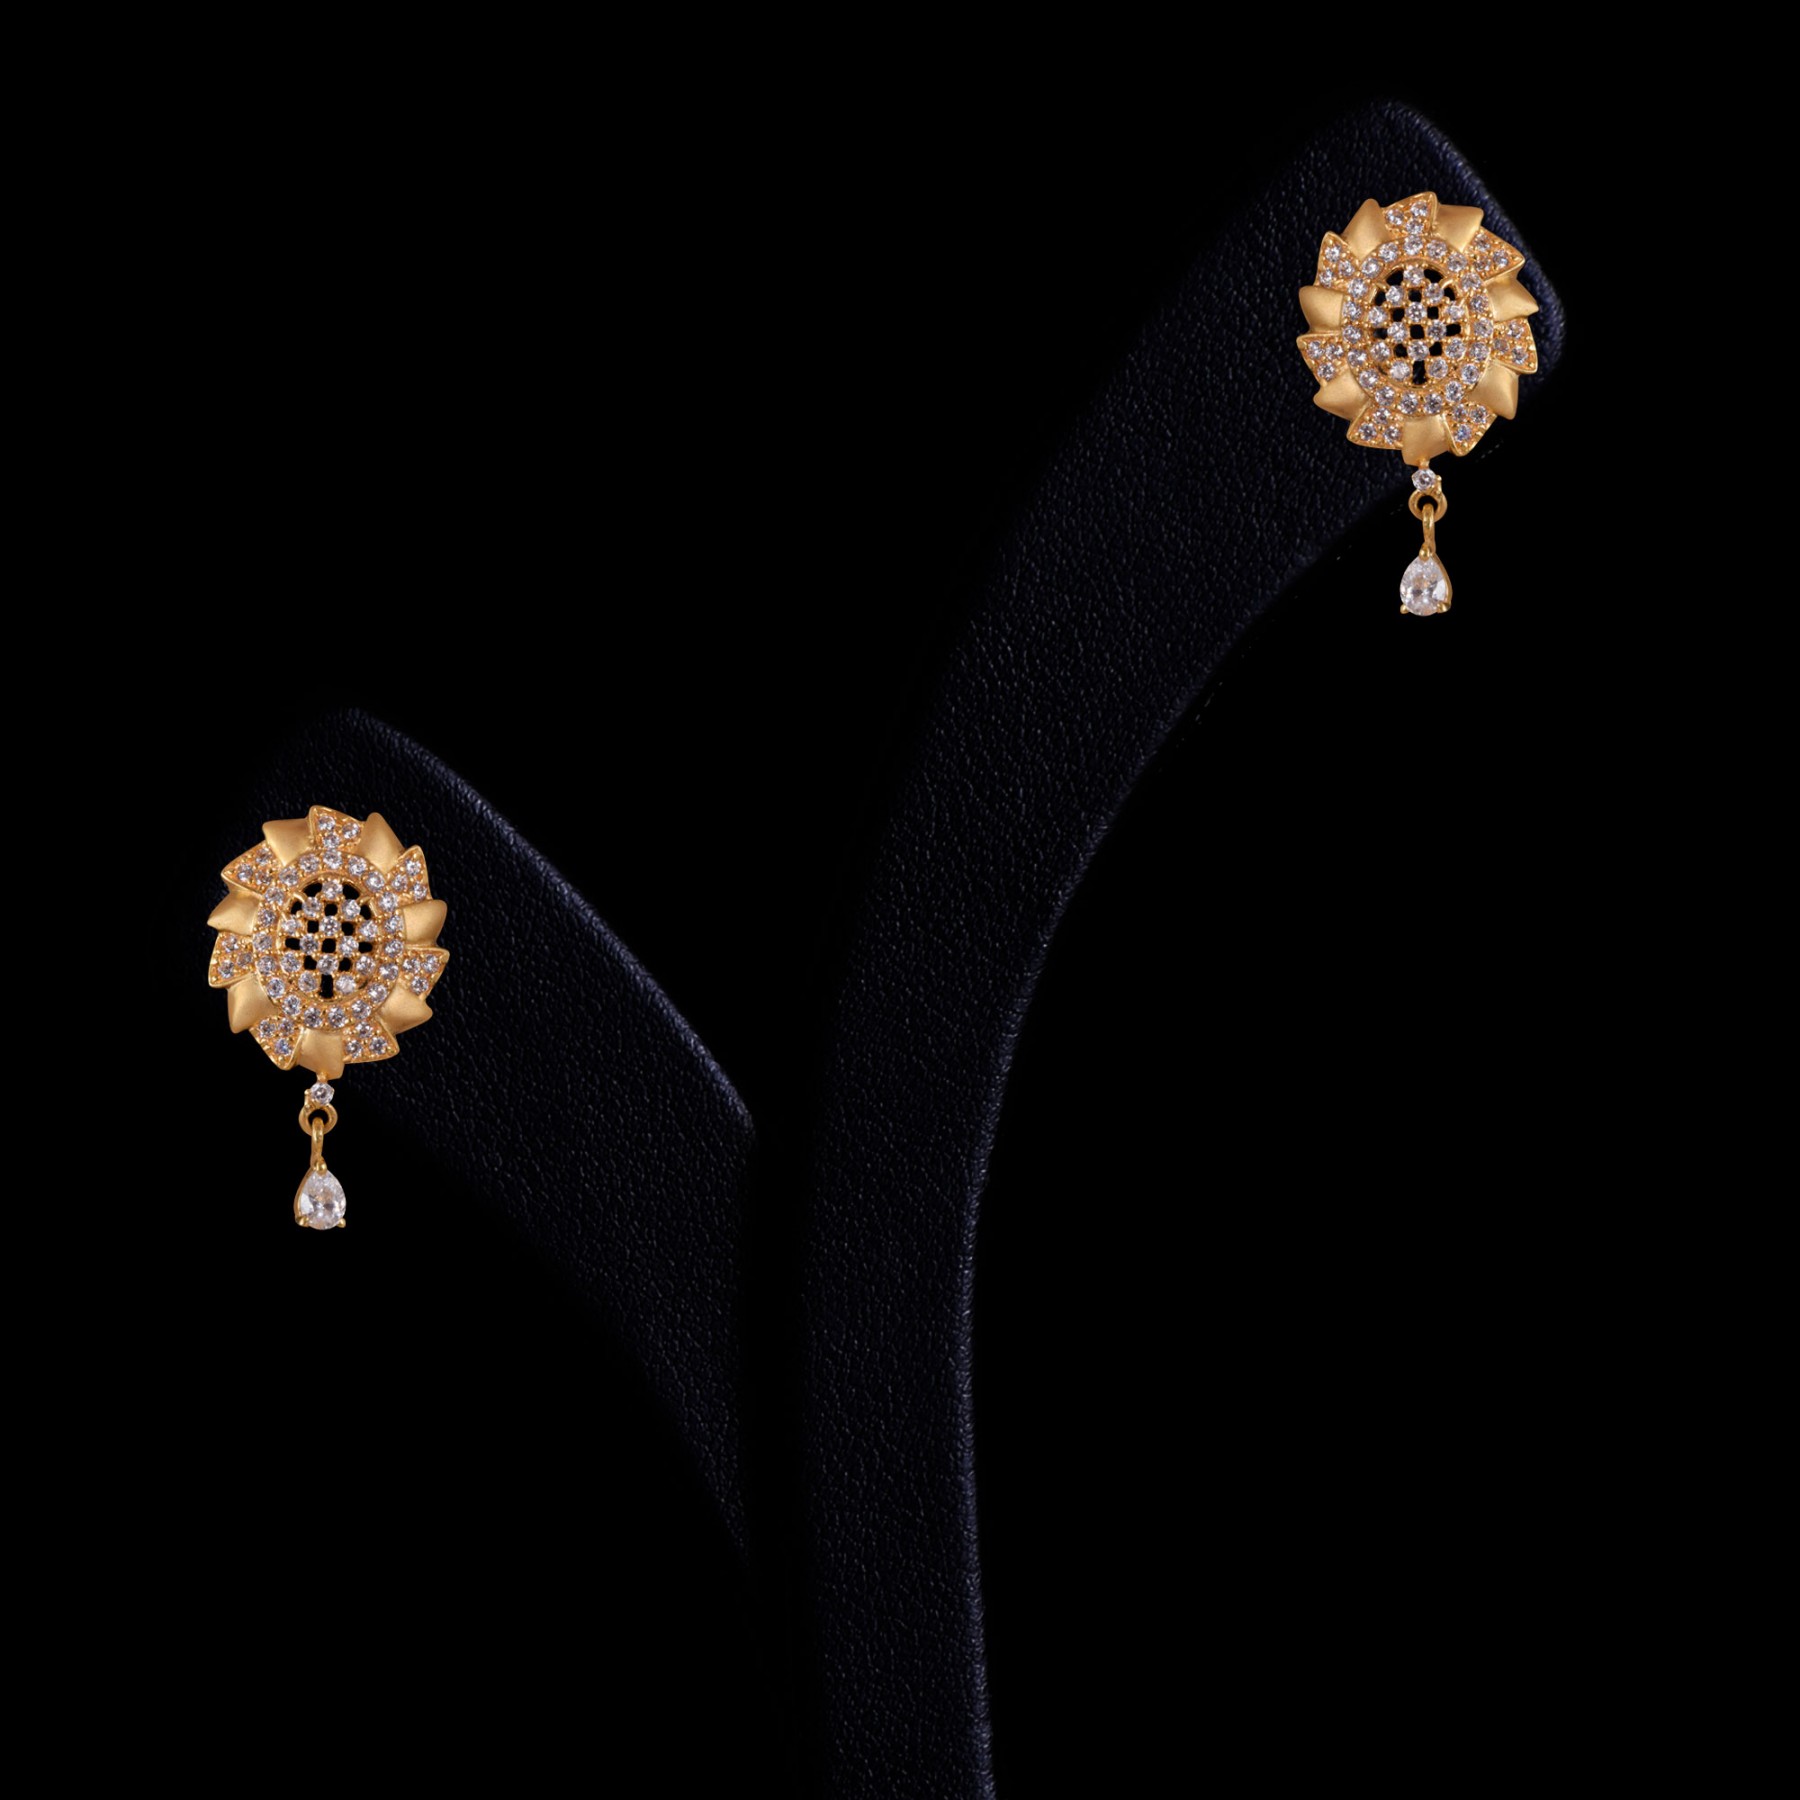 small gold earrings designs